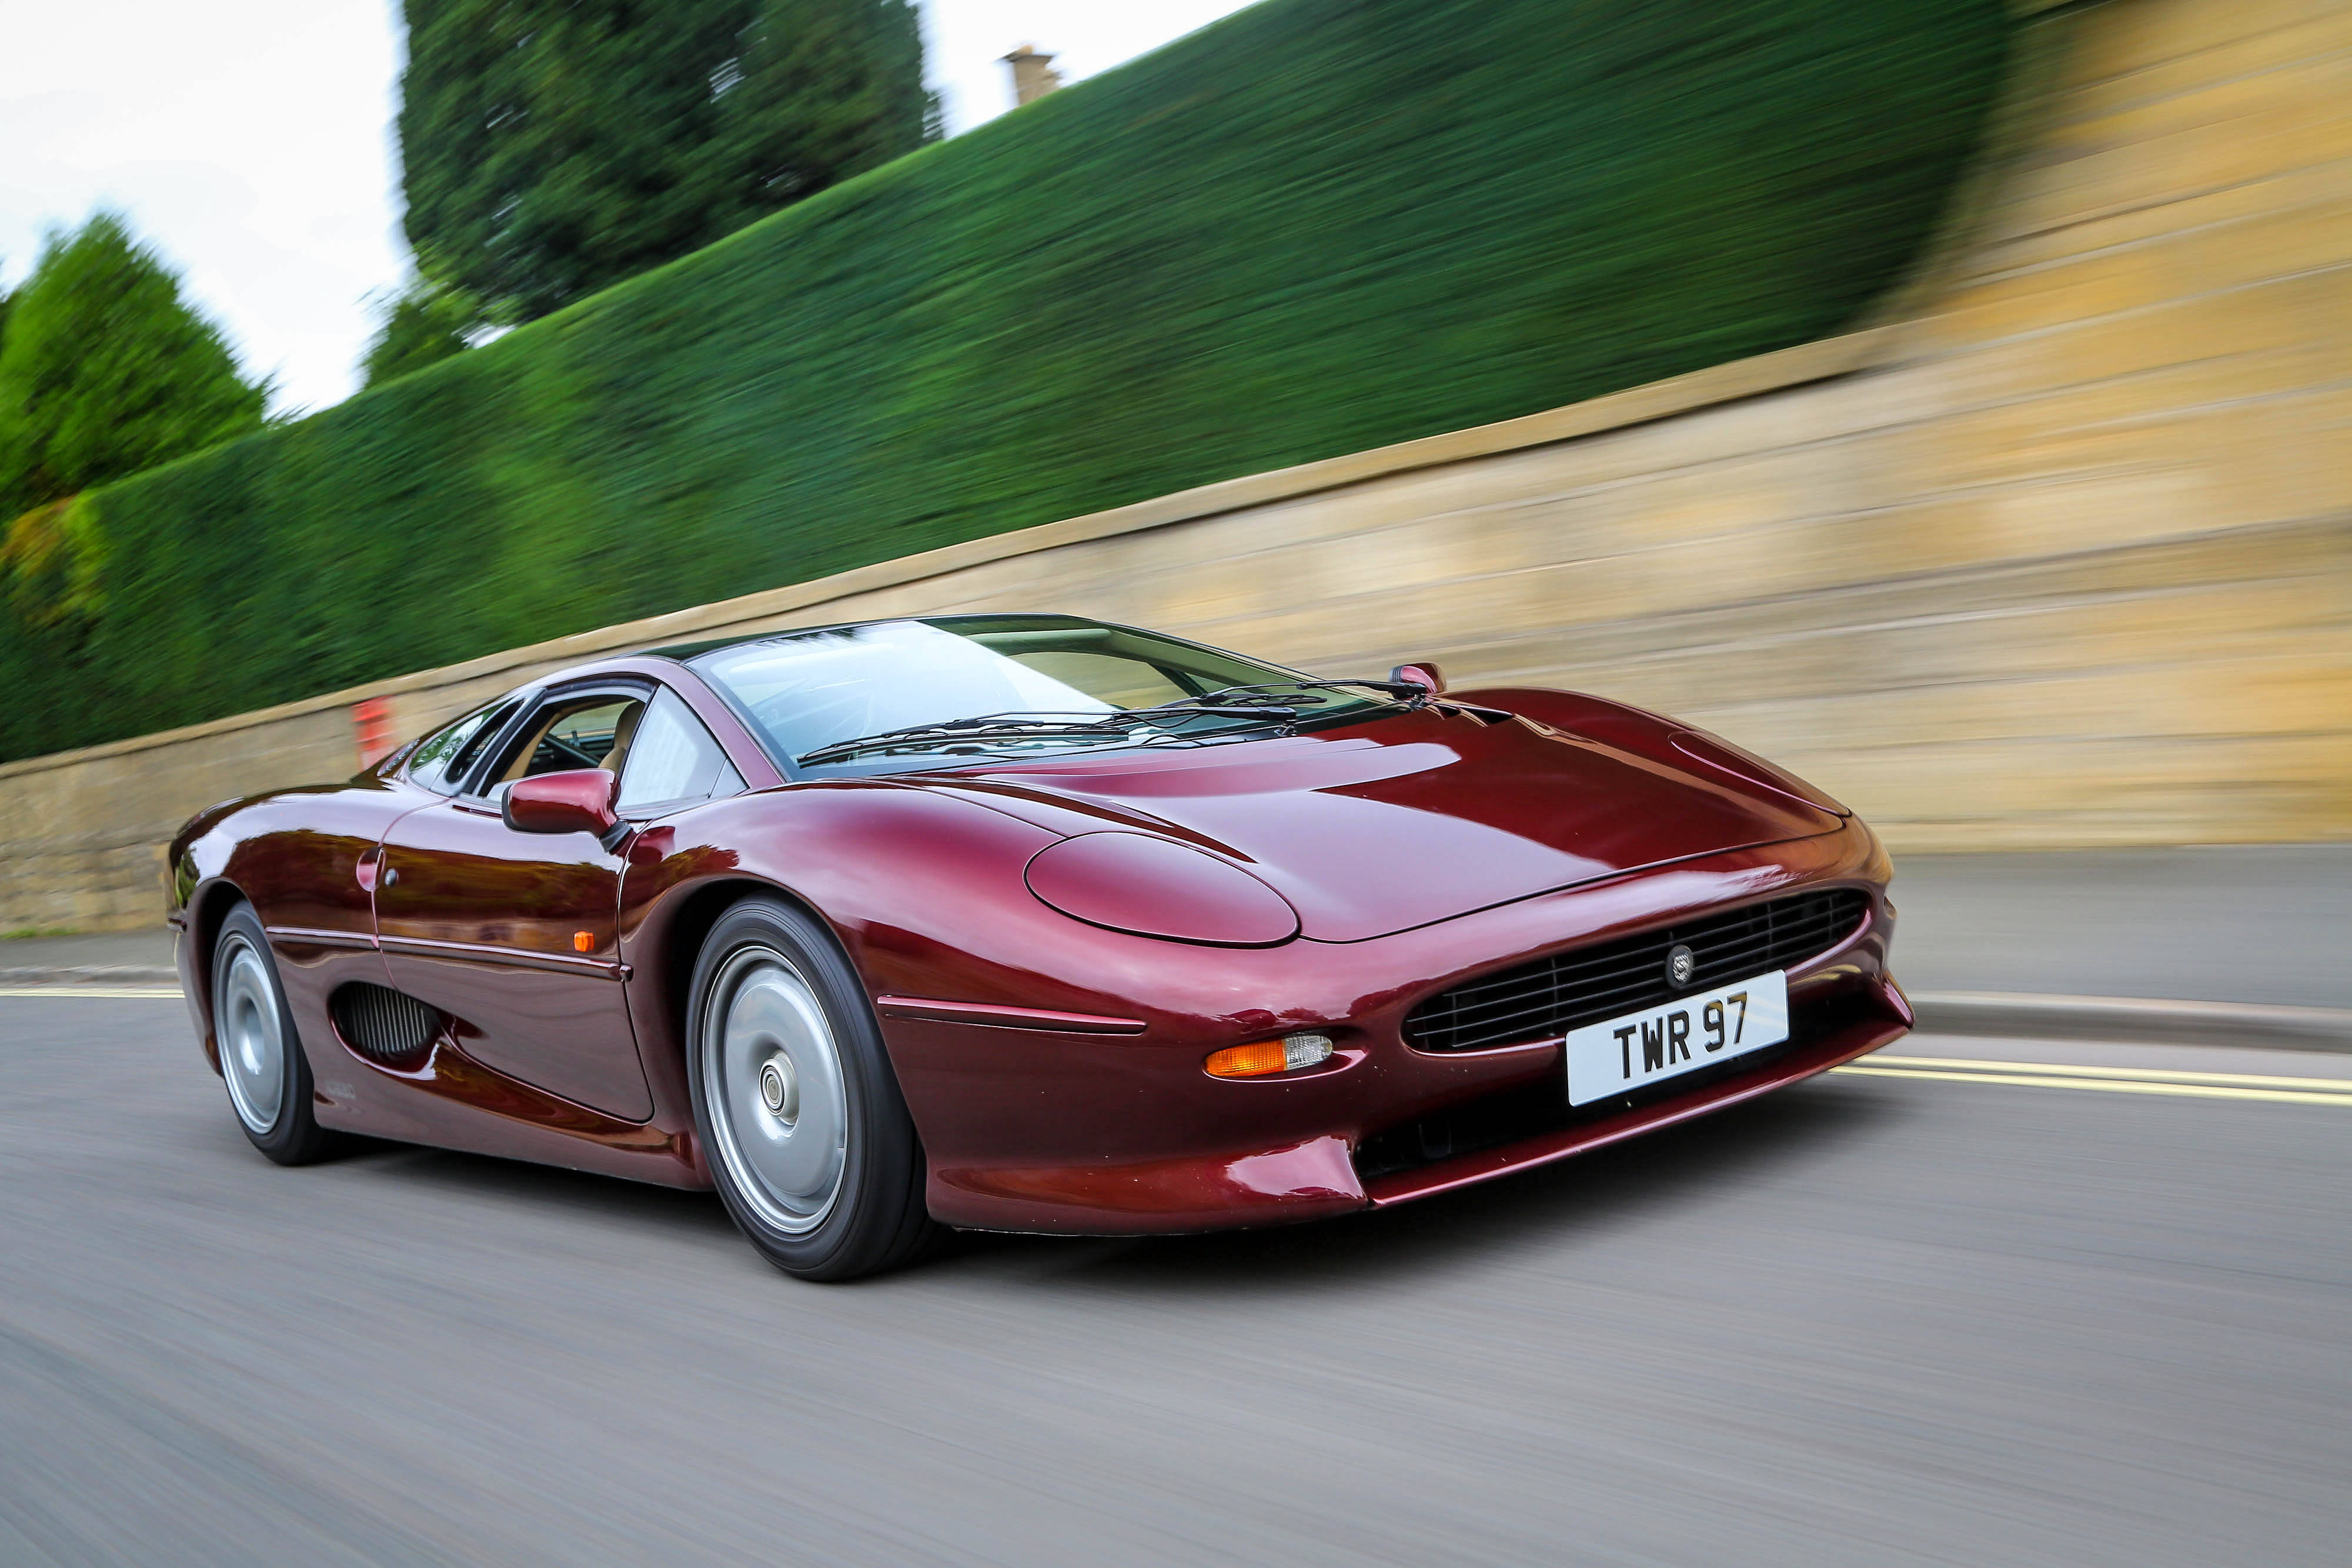 The XJ220 was one of the fastest production cars ever made